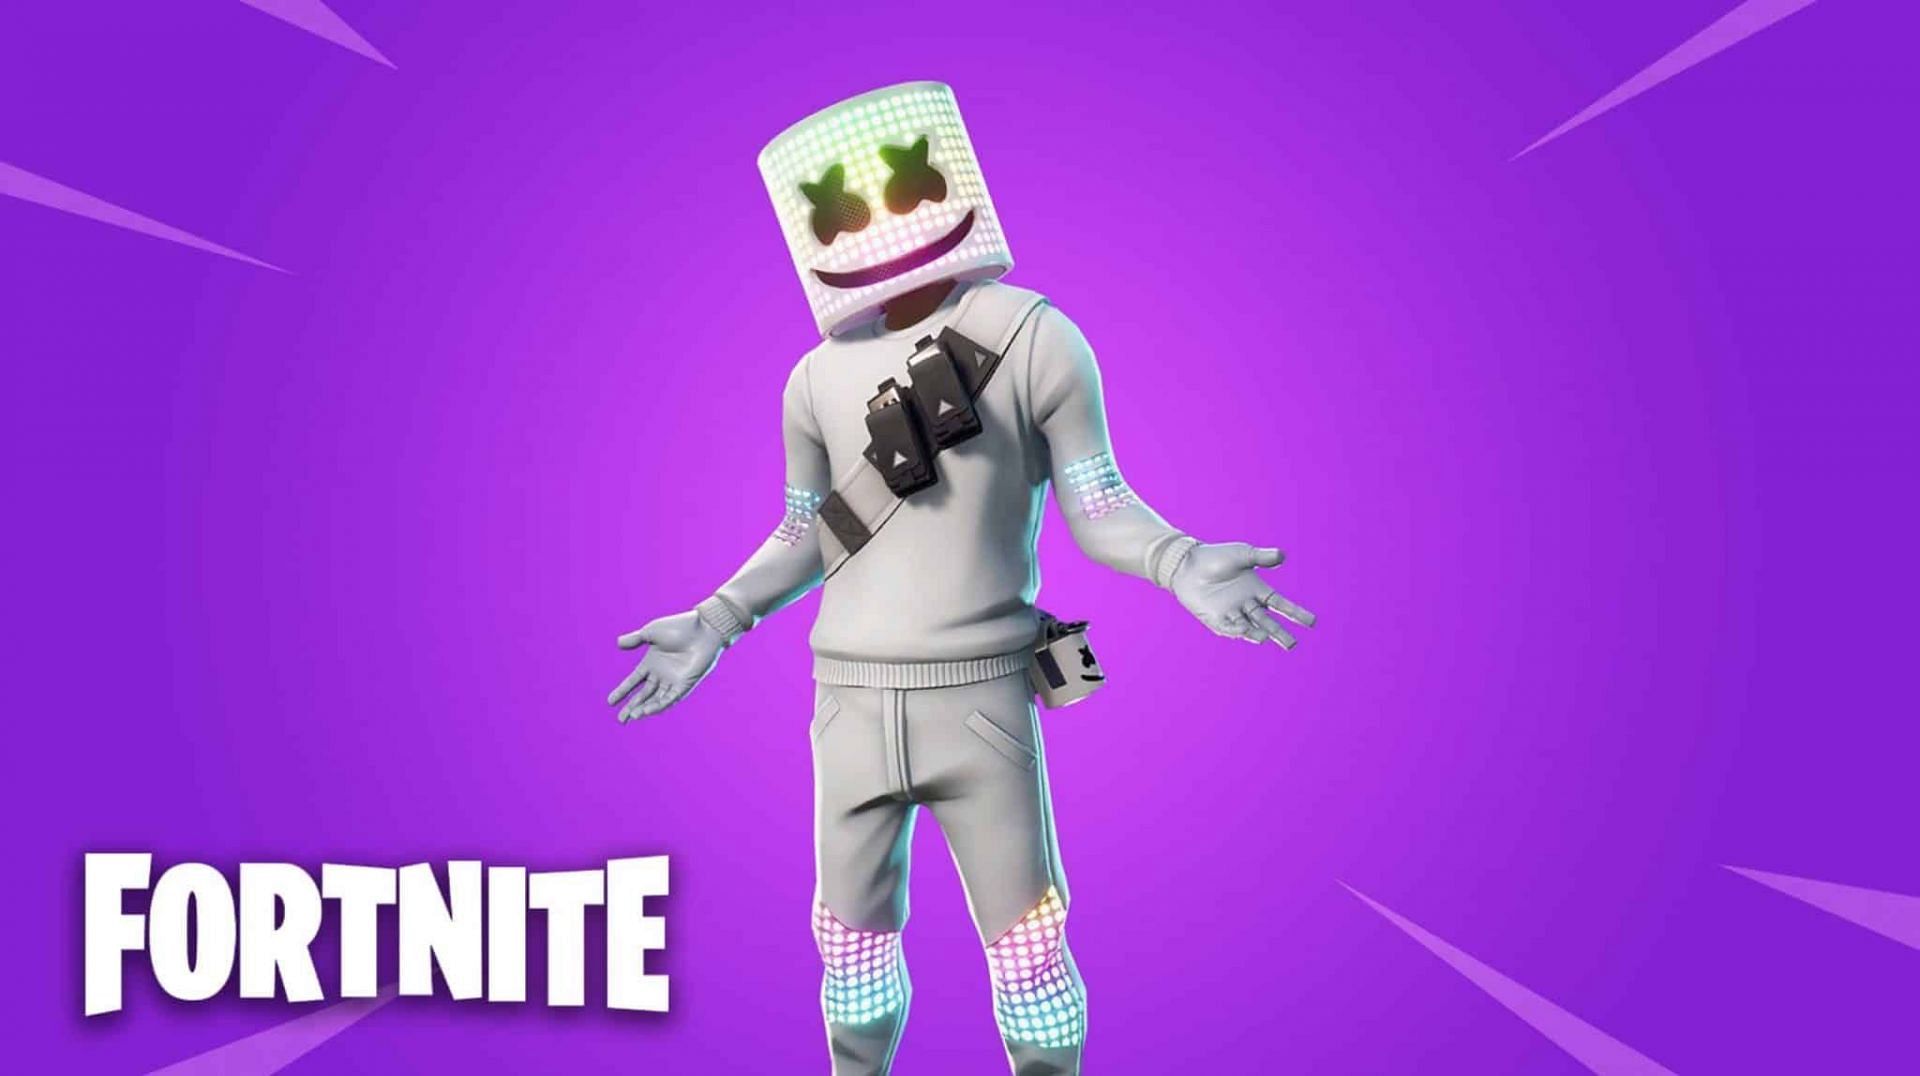 Marshmello has been a very successful skin in Fortnite (Image via Epic Games)